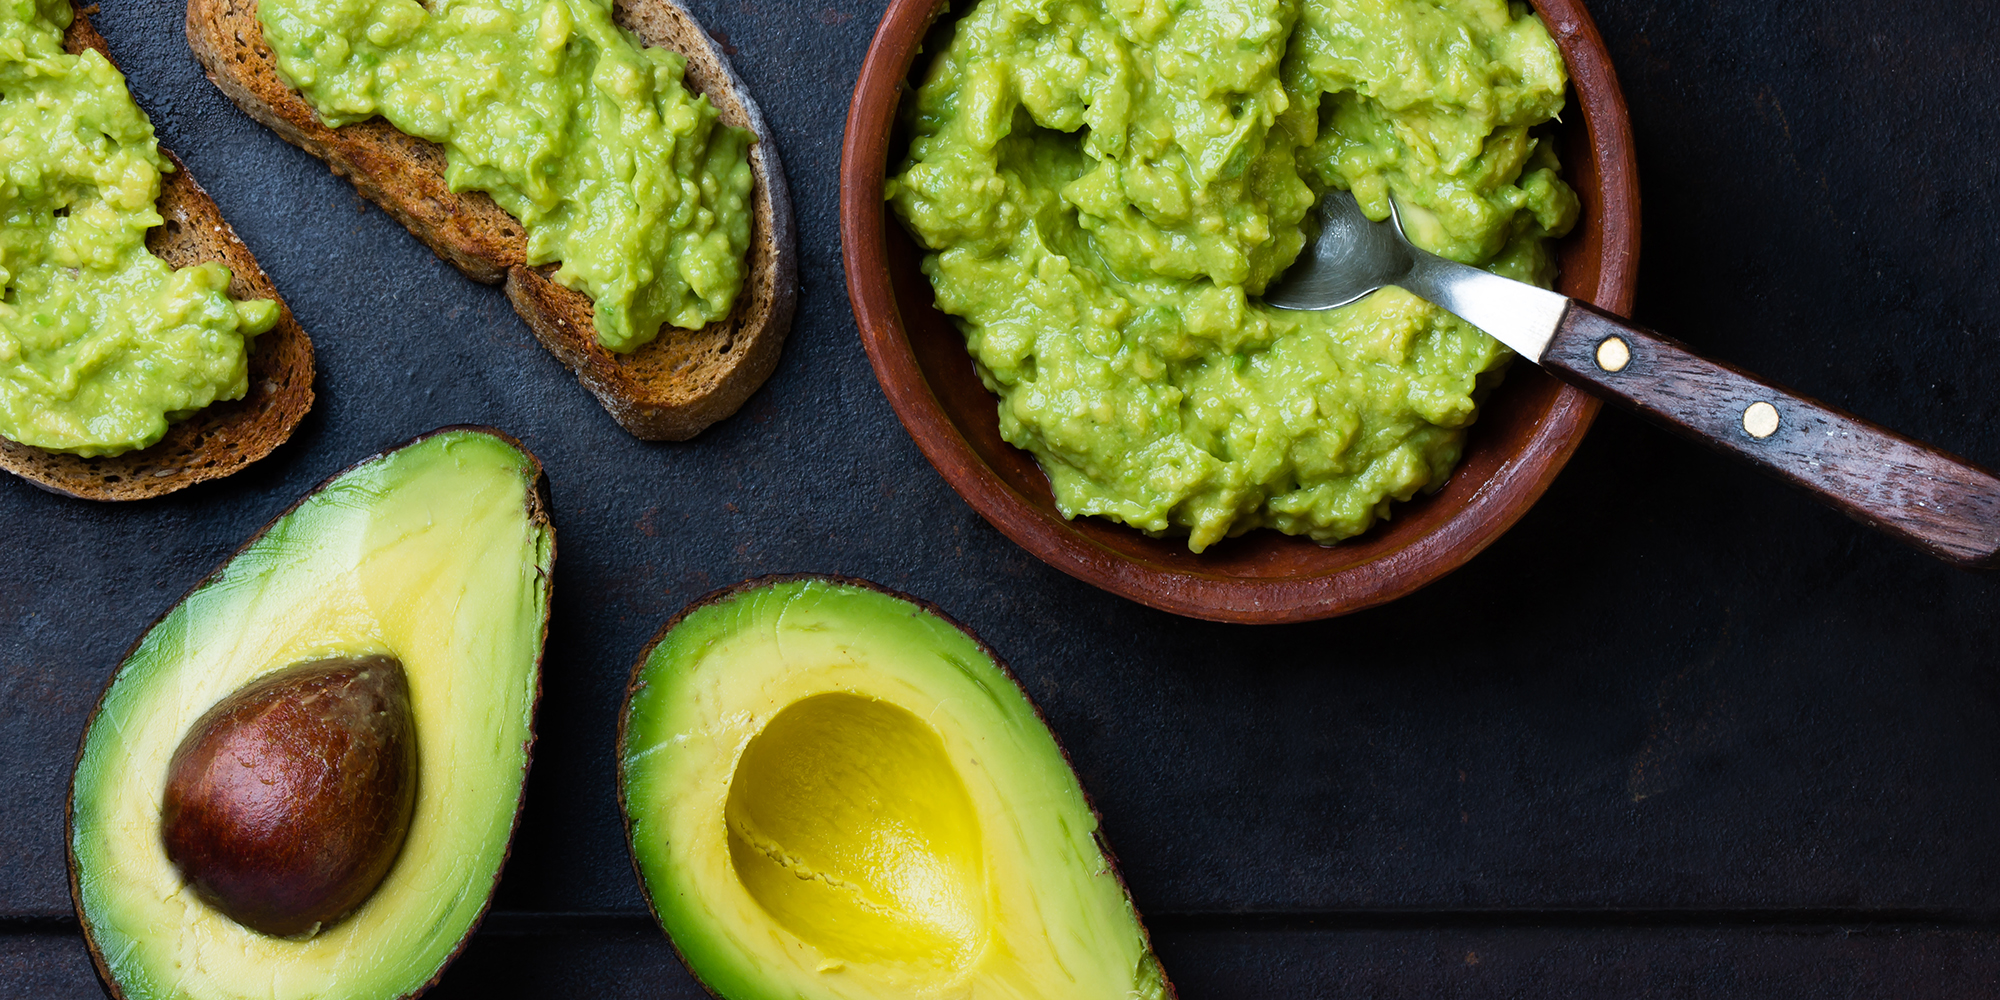 The easy trick to keep avocados fresh for 6 months